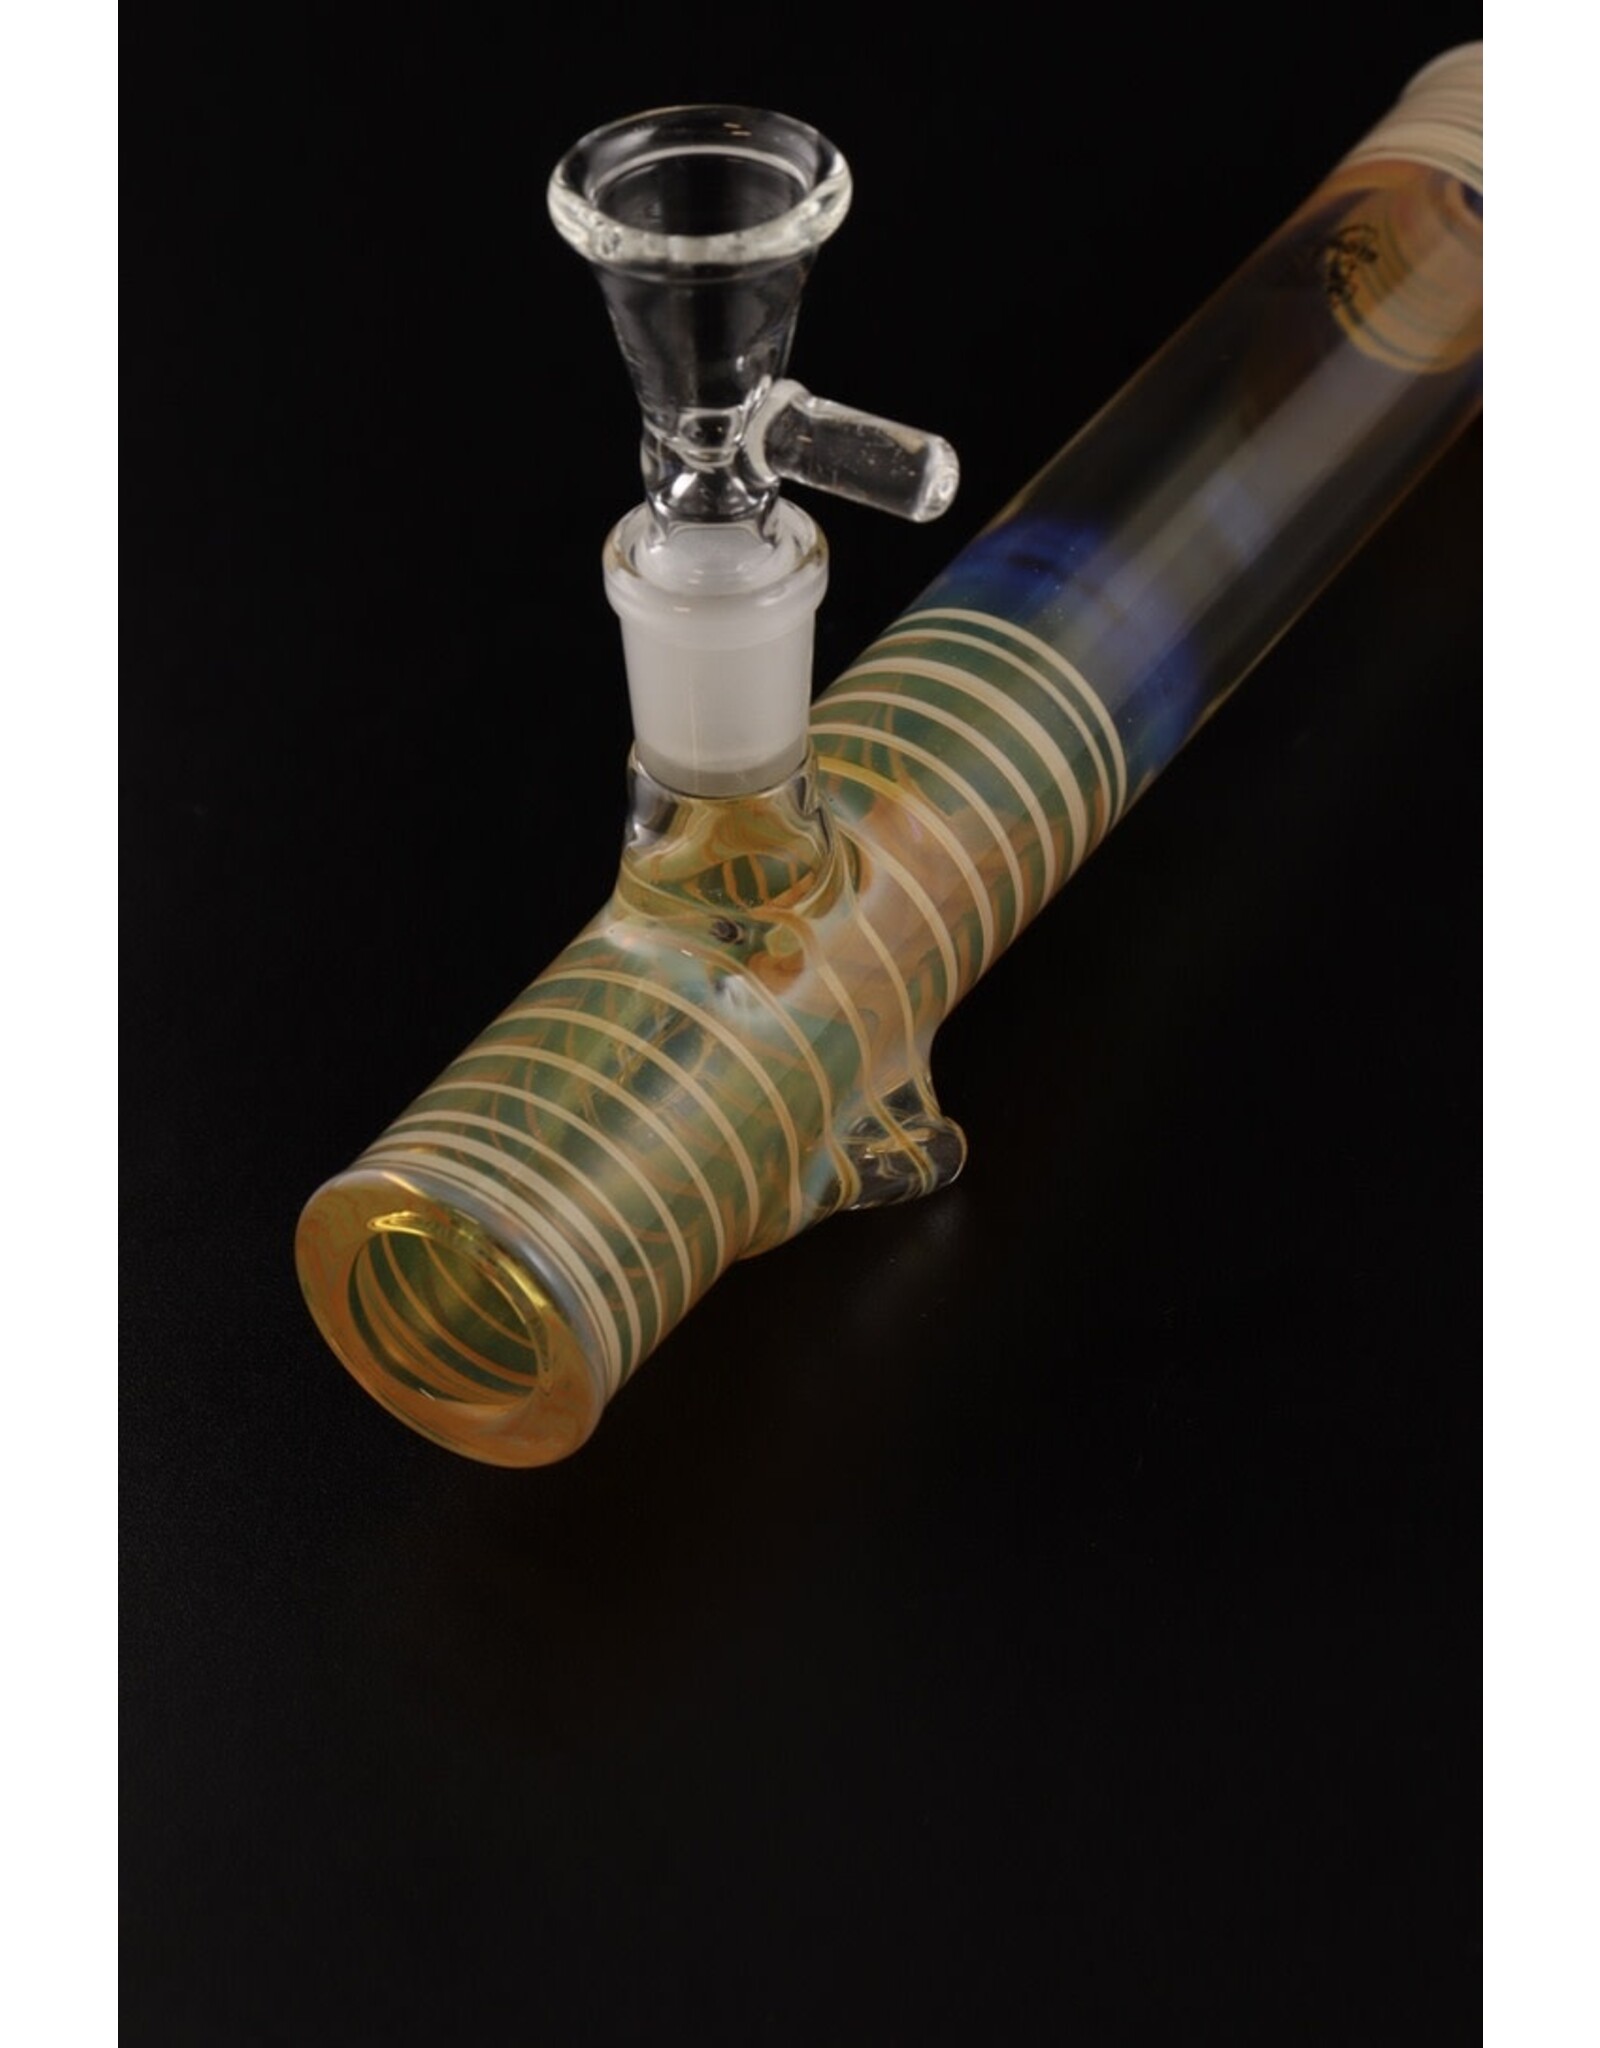 Glowfly Glass 32mm 9 Inch Steamroller w/ 14mm GonG Bowl Joint